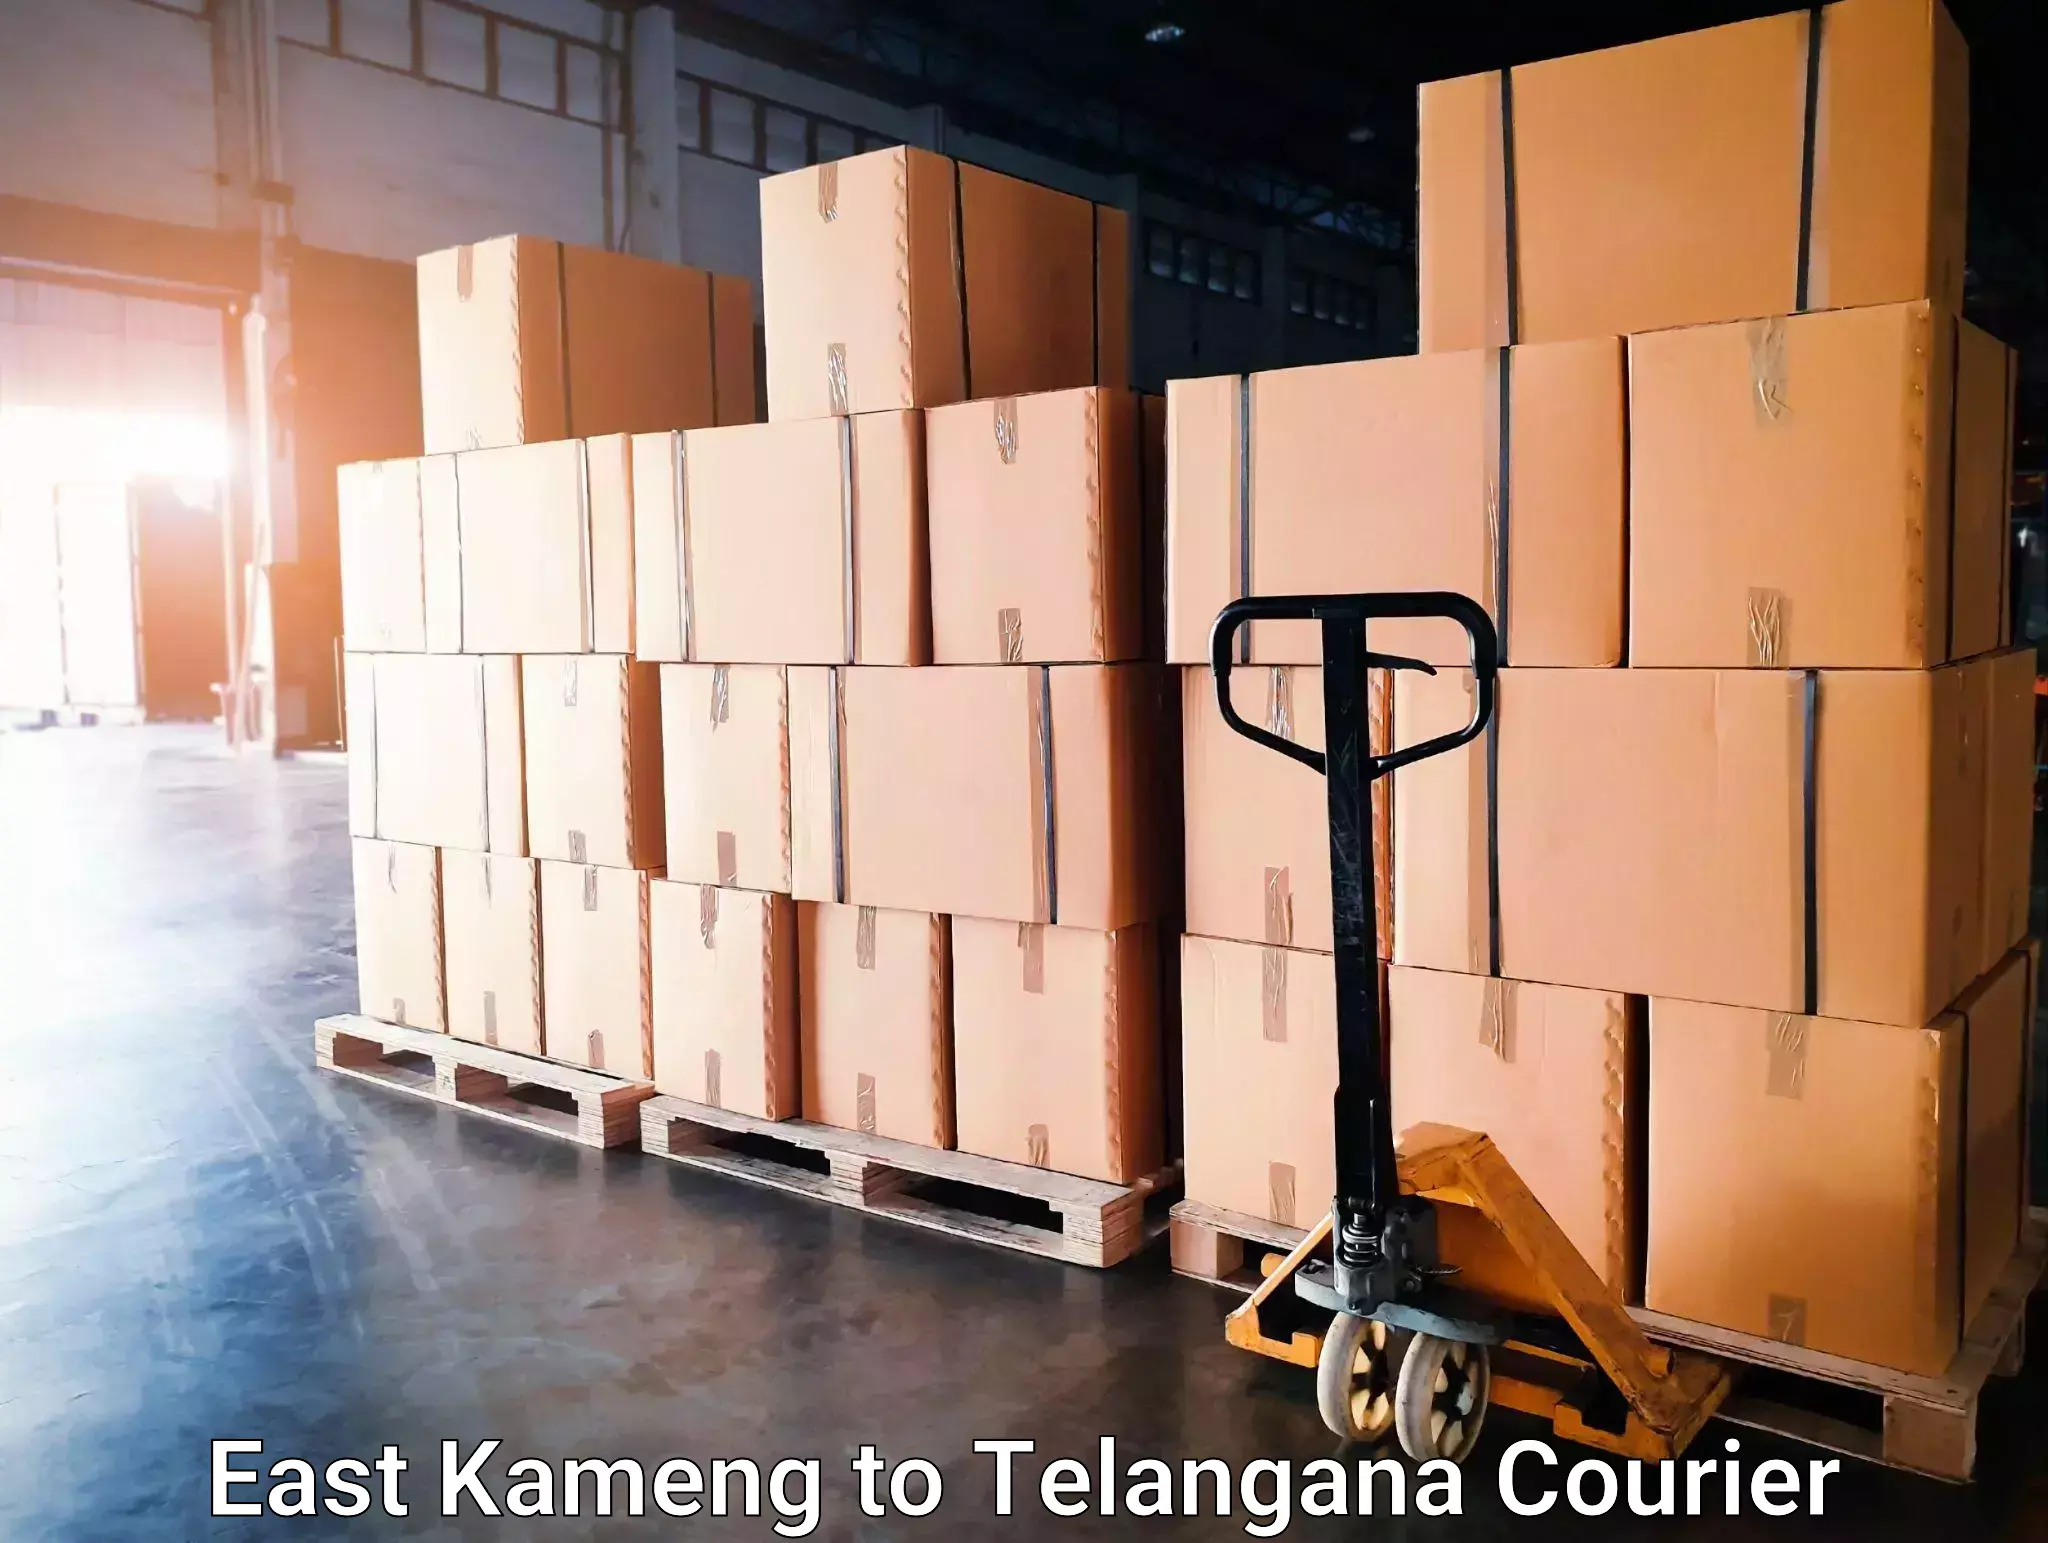 Customized shipping options in East Kameng to Bhupalpally